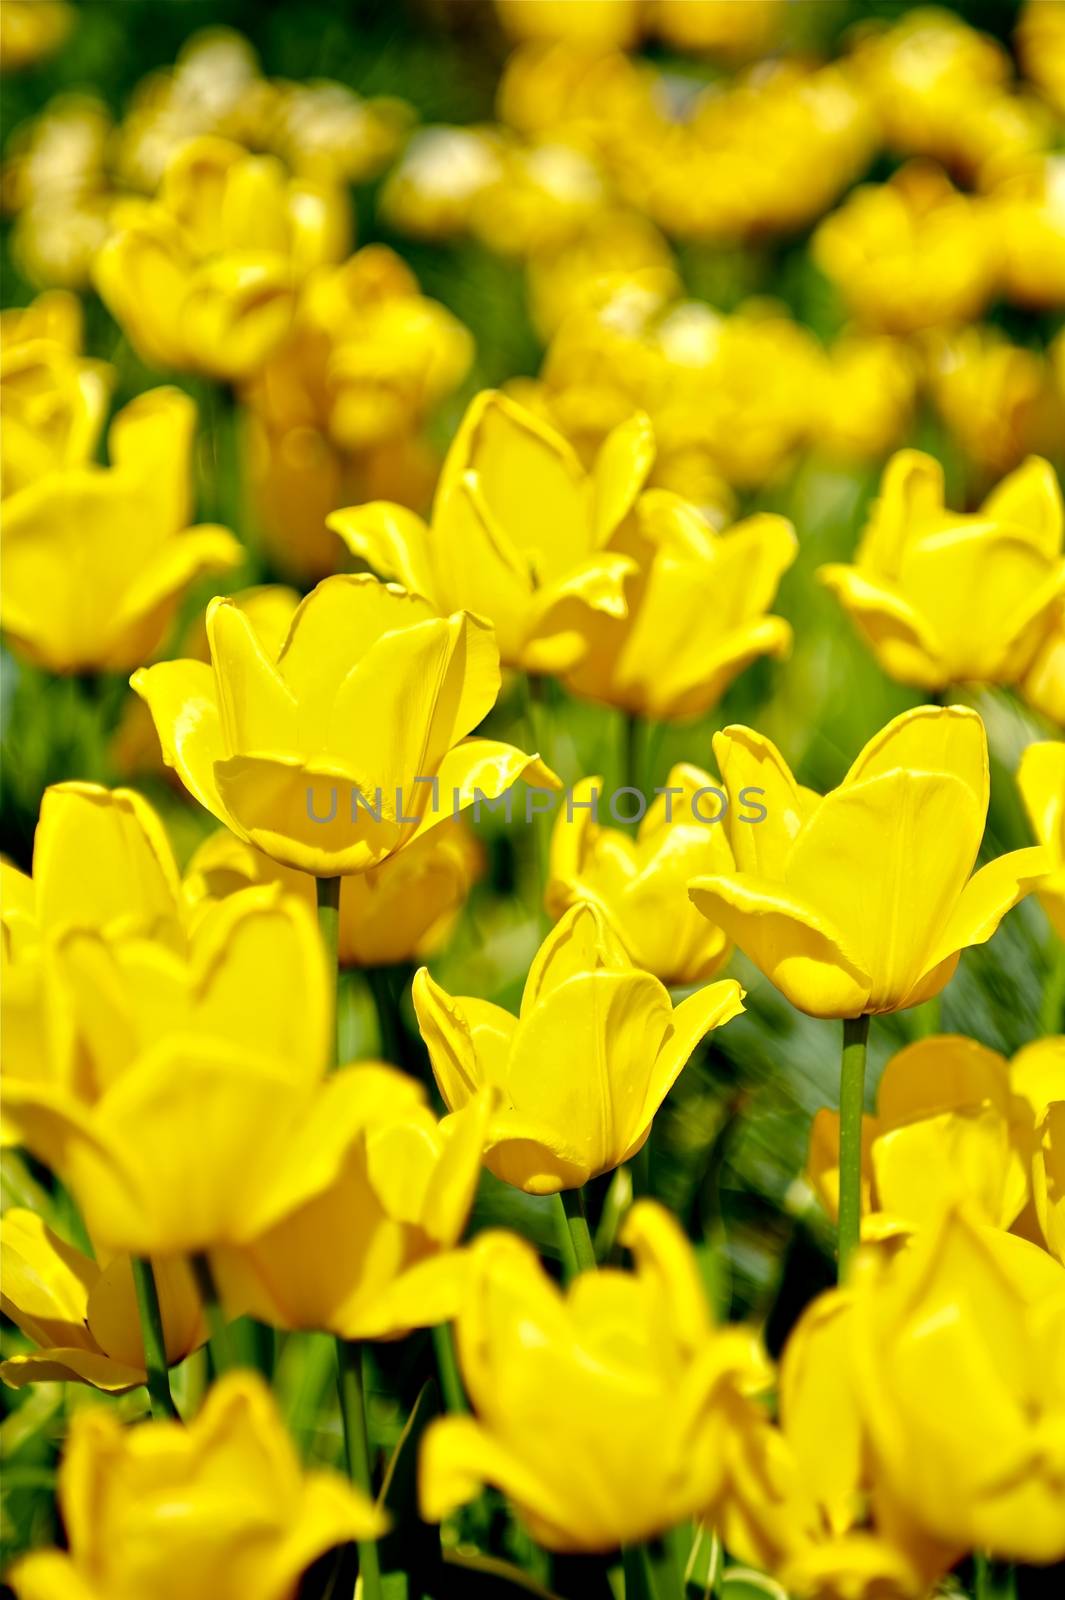 Flowering Tulips. Spring in the Garden. Many Yellow Flowering Tulips - Vertical Photo.